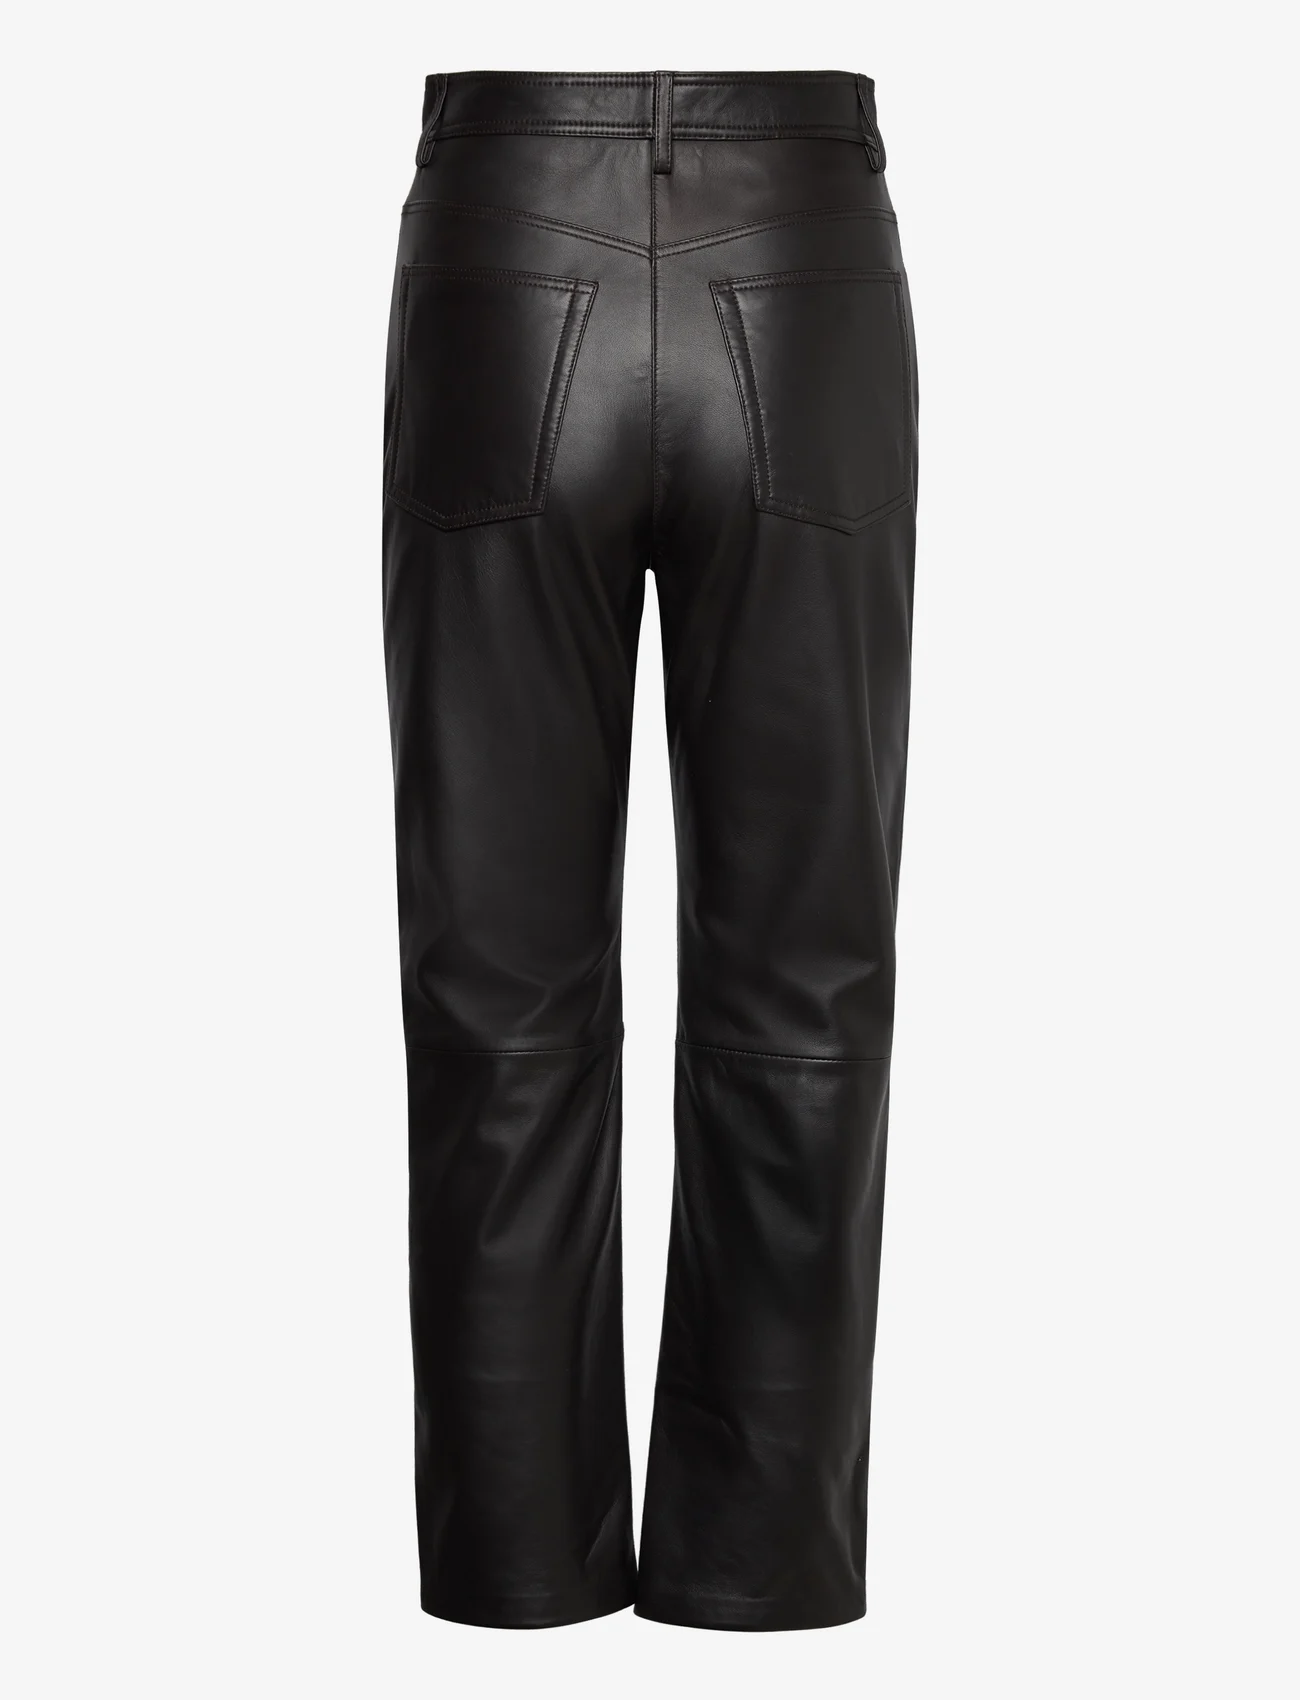 GANT - D2. HW CROPPED LEATHER PANT - juhlamuotia outlet-hintaan - cocoa bean - 1